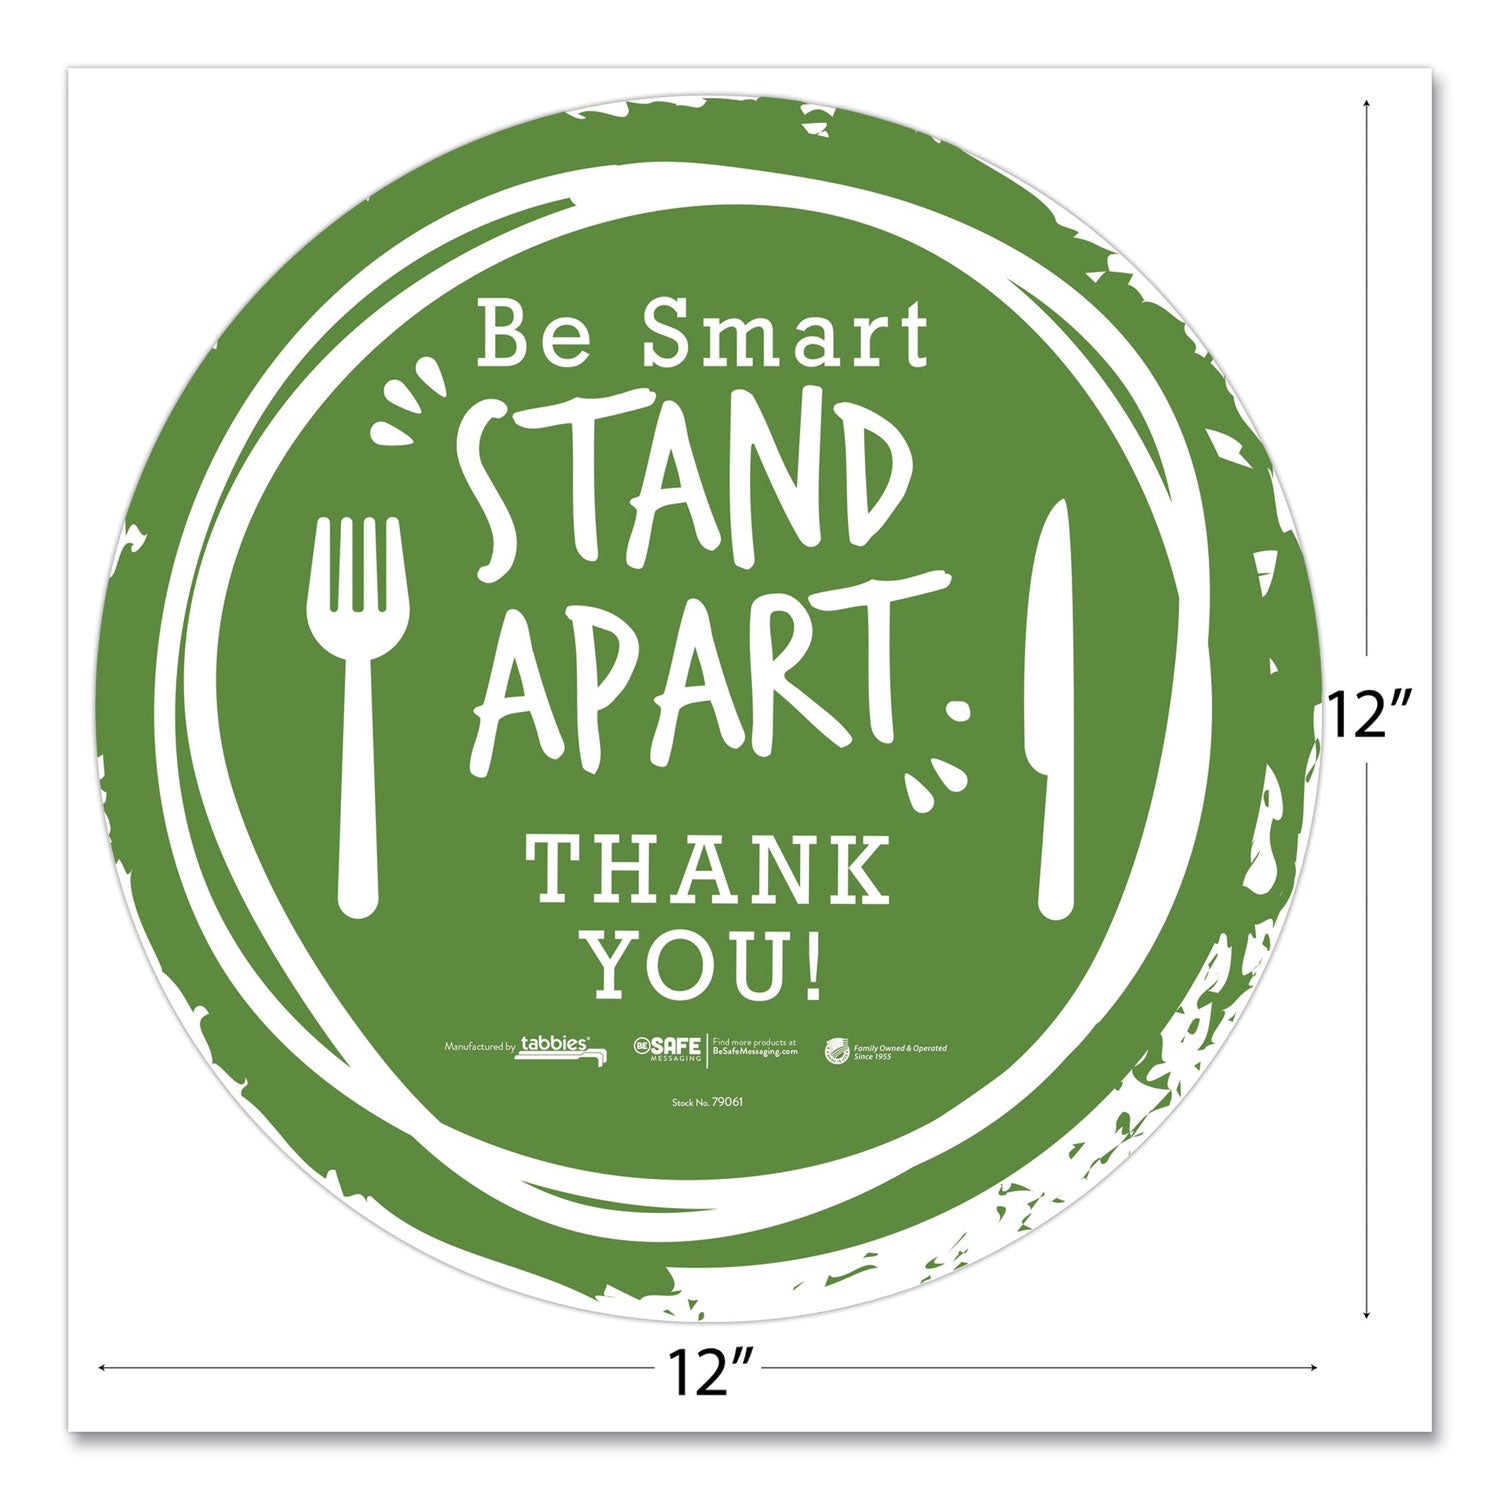 besafe-messaging-floor-decals-be-smart-stand-apart;-knife-fork;-thank-you-12-dia-green-white-6-carton_tab79061 - 2